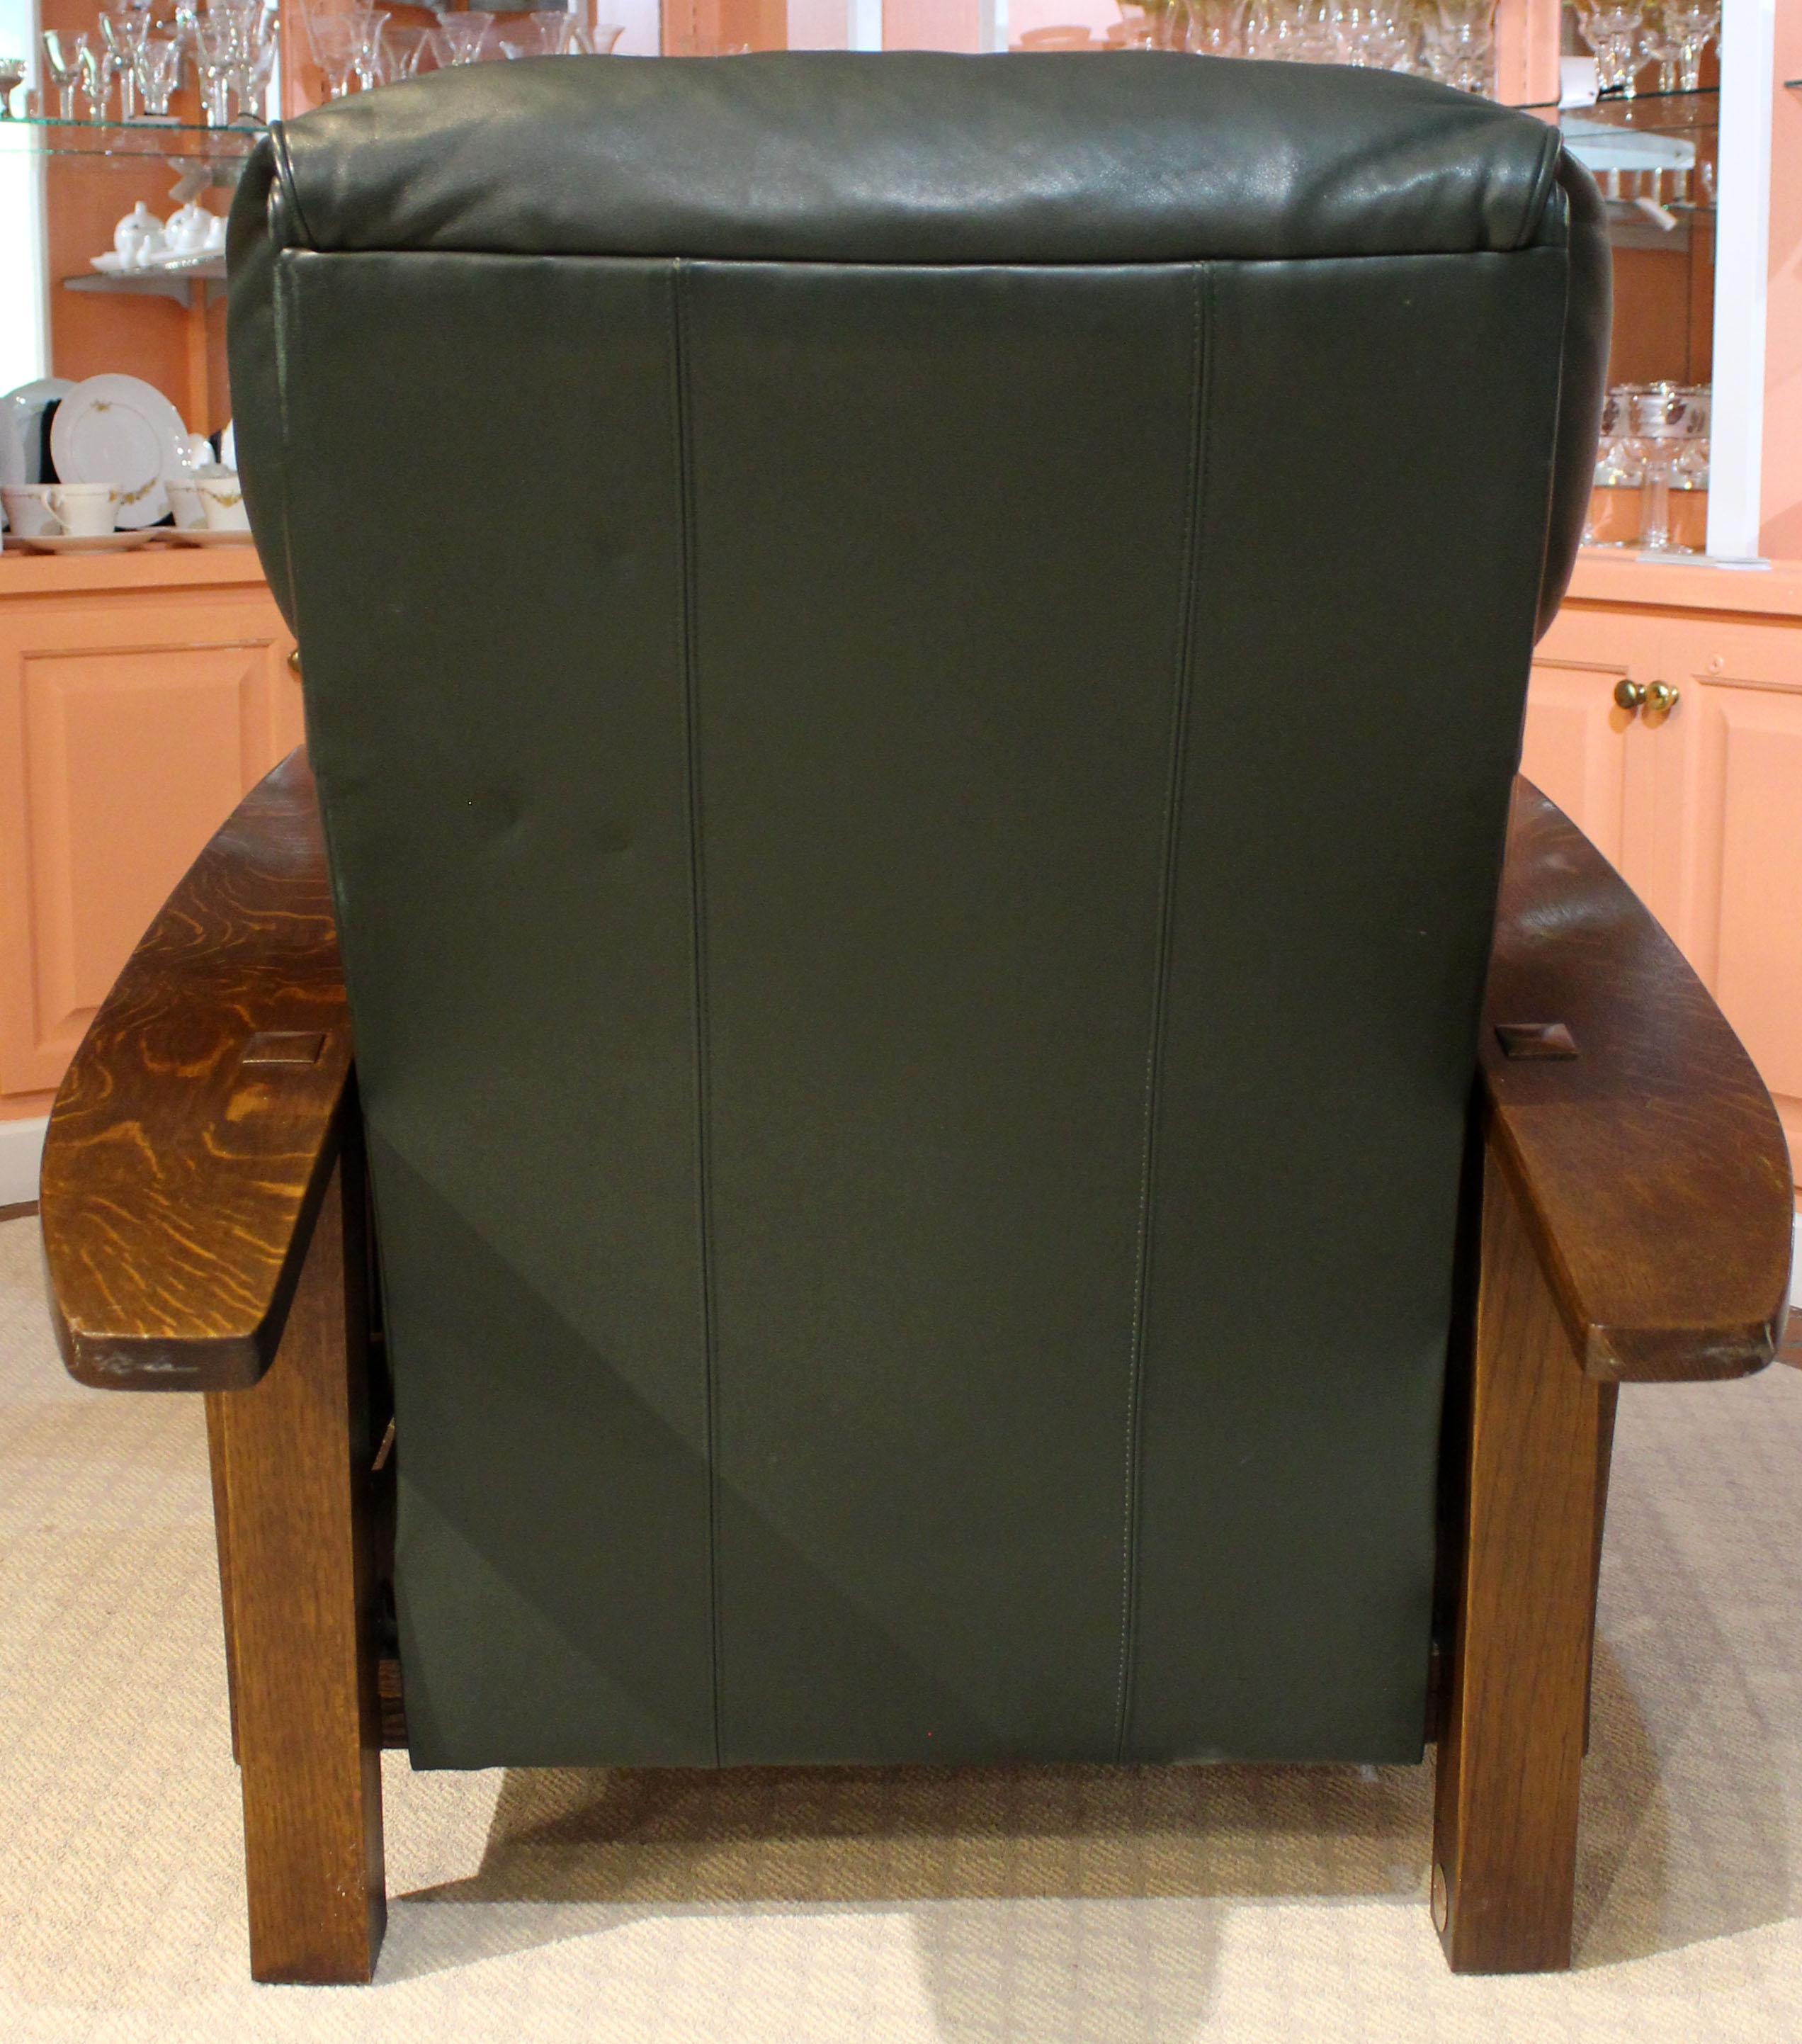 Vintage Stickley solid oak & blue-green leather reclining arm chair. This slatted sides with long, bowed arms design is a modern play on the historic Morris chairs. Superb craftmanship & the finest materials. Stickley label, Manlius, N.Y. and